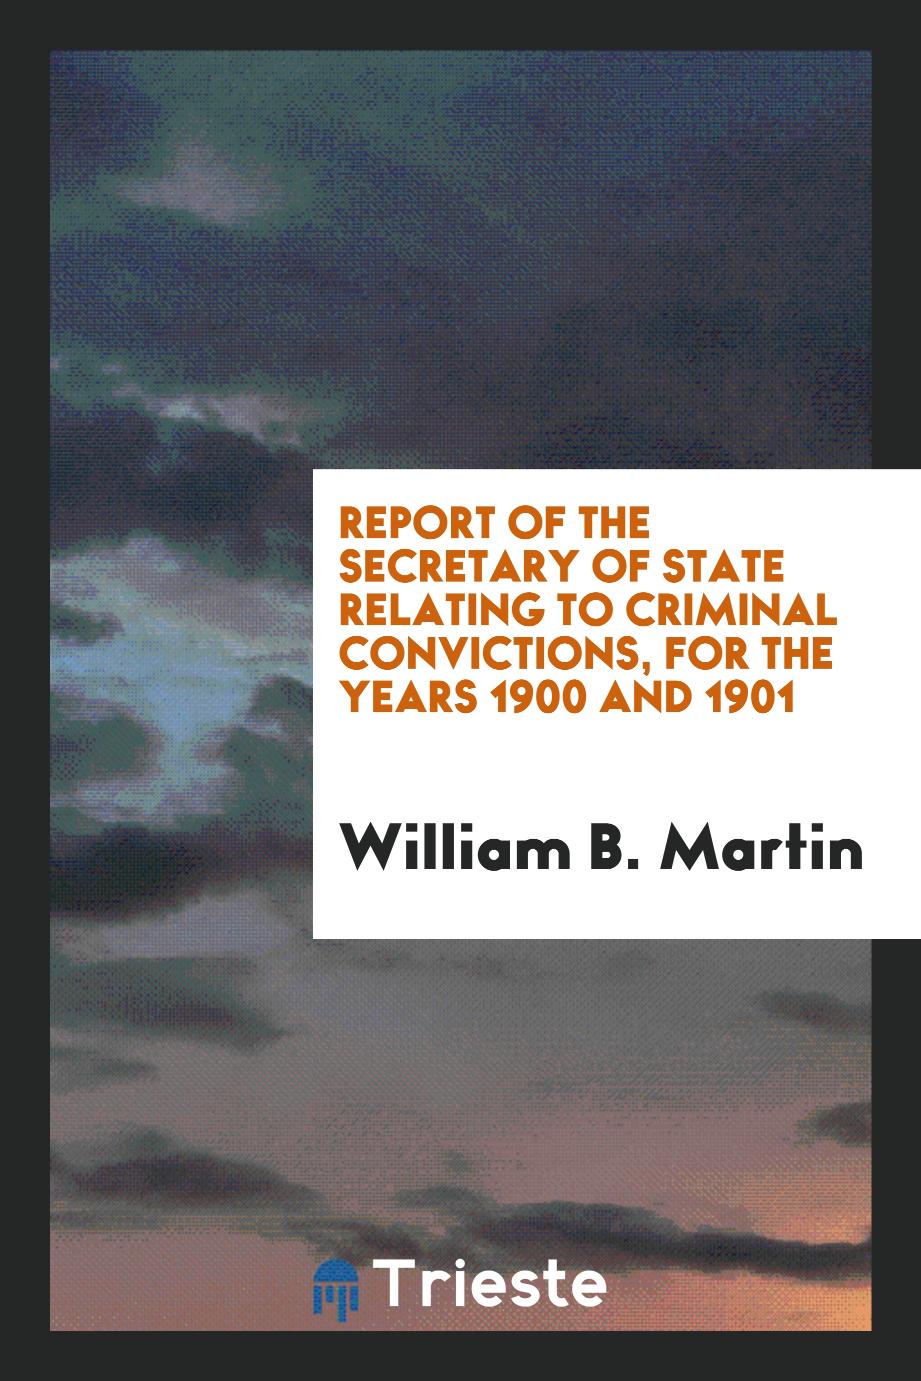 Report of the Secretary of State Relating to Criminal Convictions, for the Years 1900 and 1901